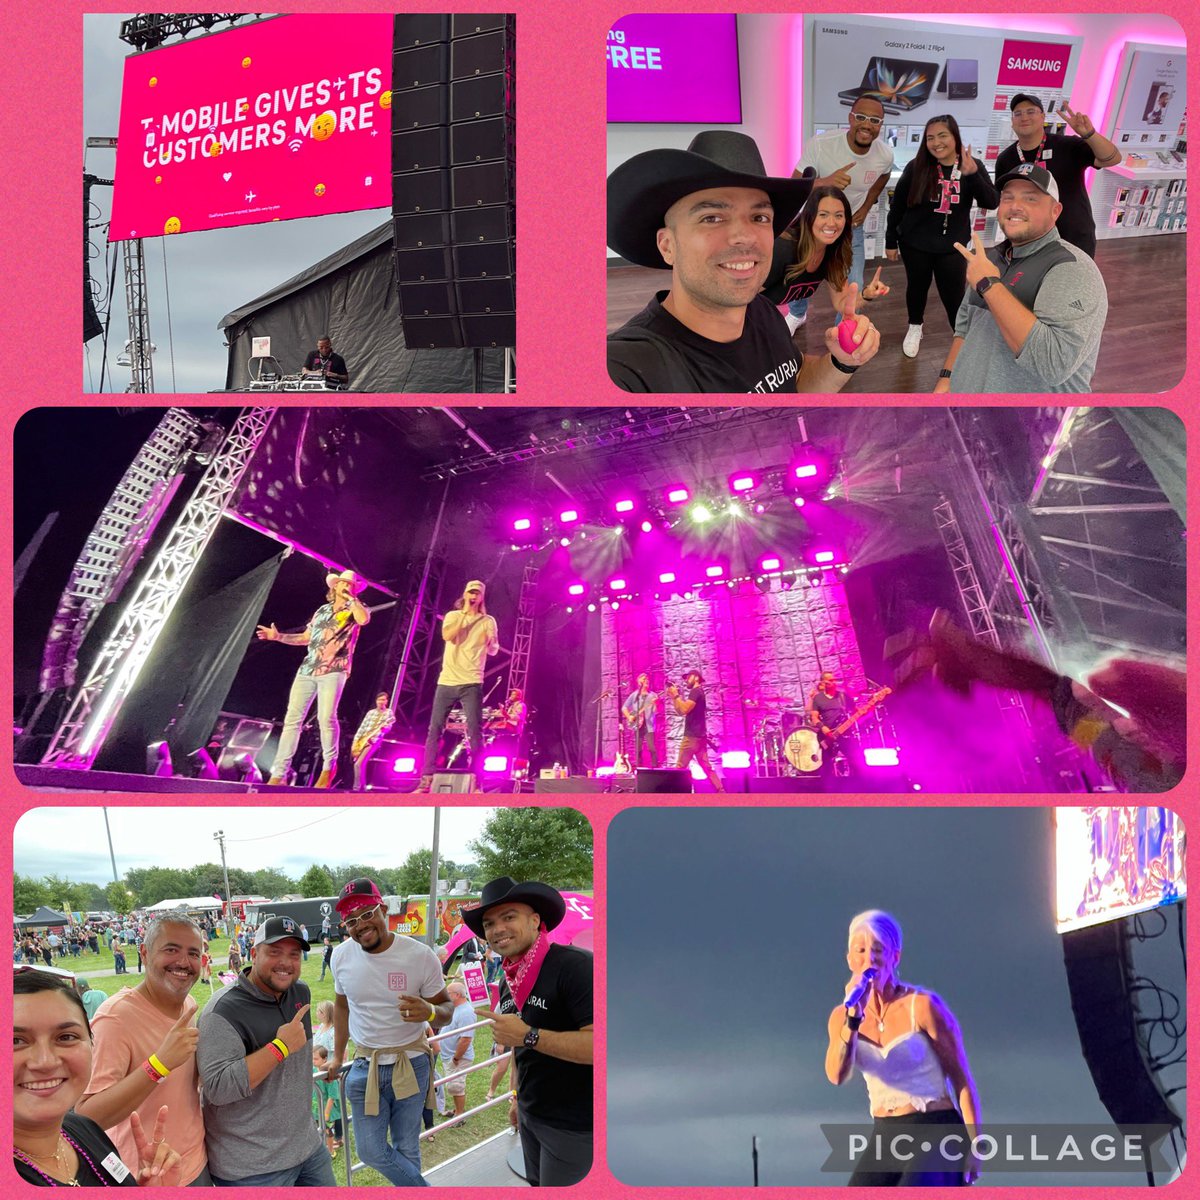 Thank you @Woodstock_IL and @wdstkchamber for partnering with @TMobile and throwing the BEST @FLAGALine concert we’ve ever seen!! A night to remember forever!! #HometownTechover @pedrobyers1 @tglover187 @ChartierDoug @JonFreier